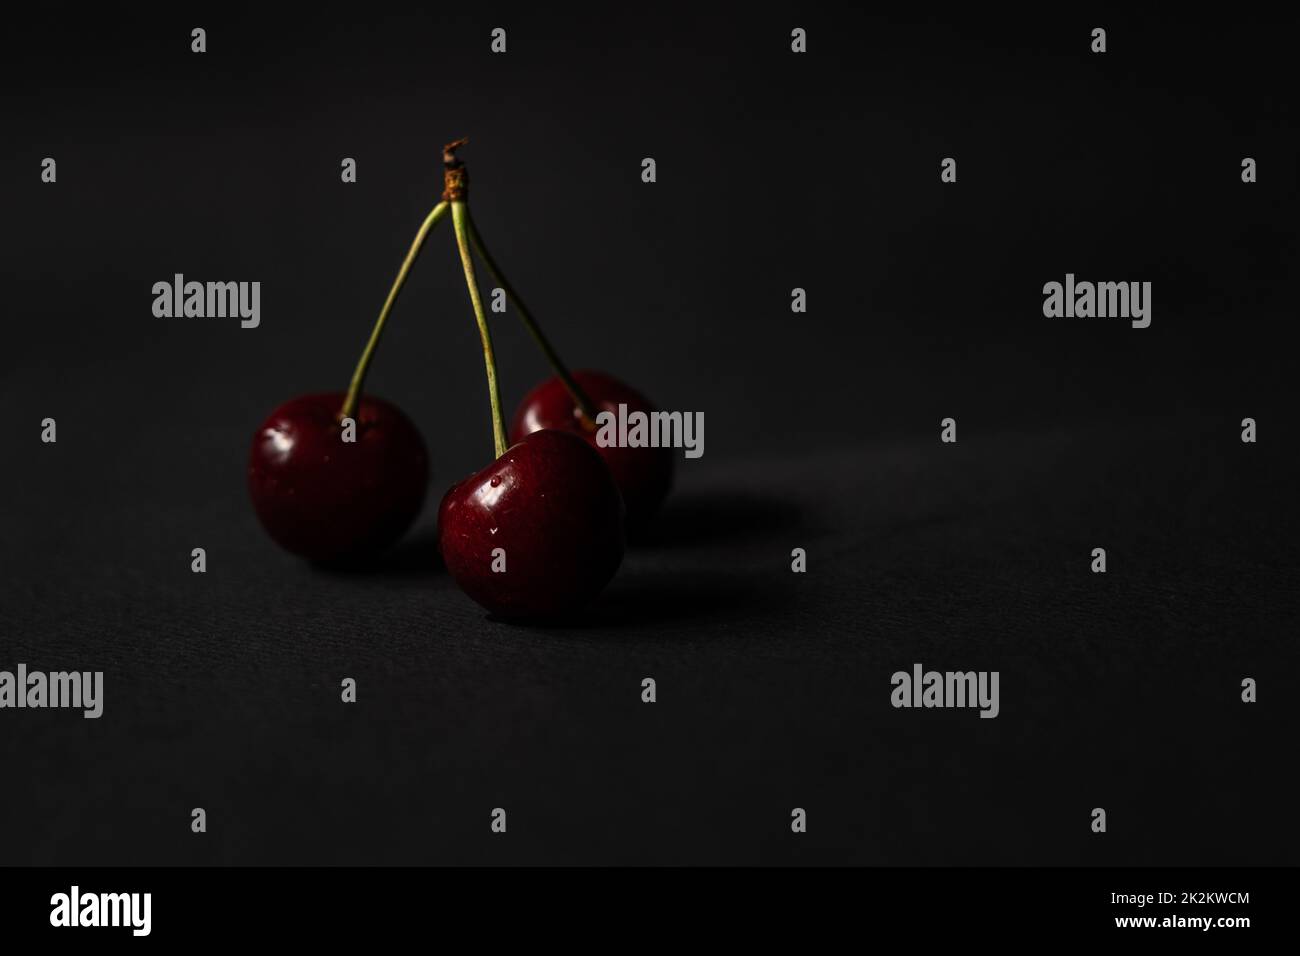 Three cherries are placed on a black background with negative space Stock Photo